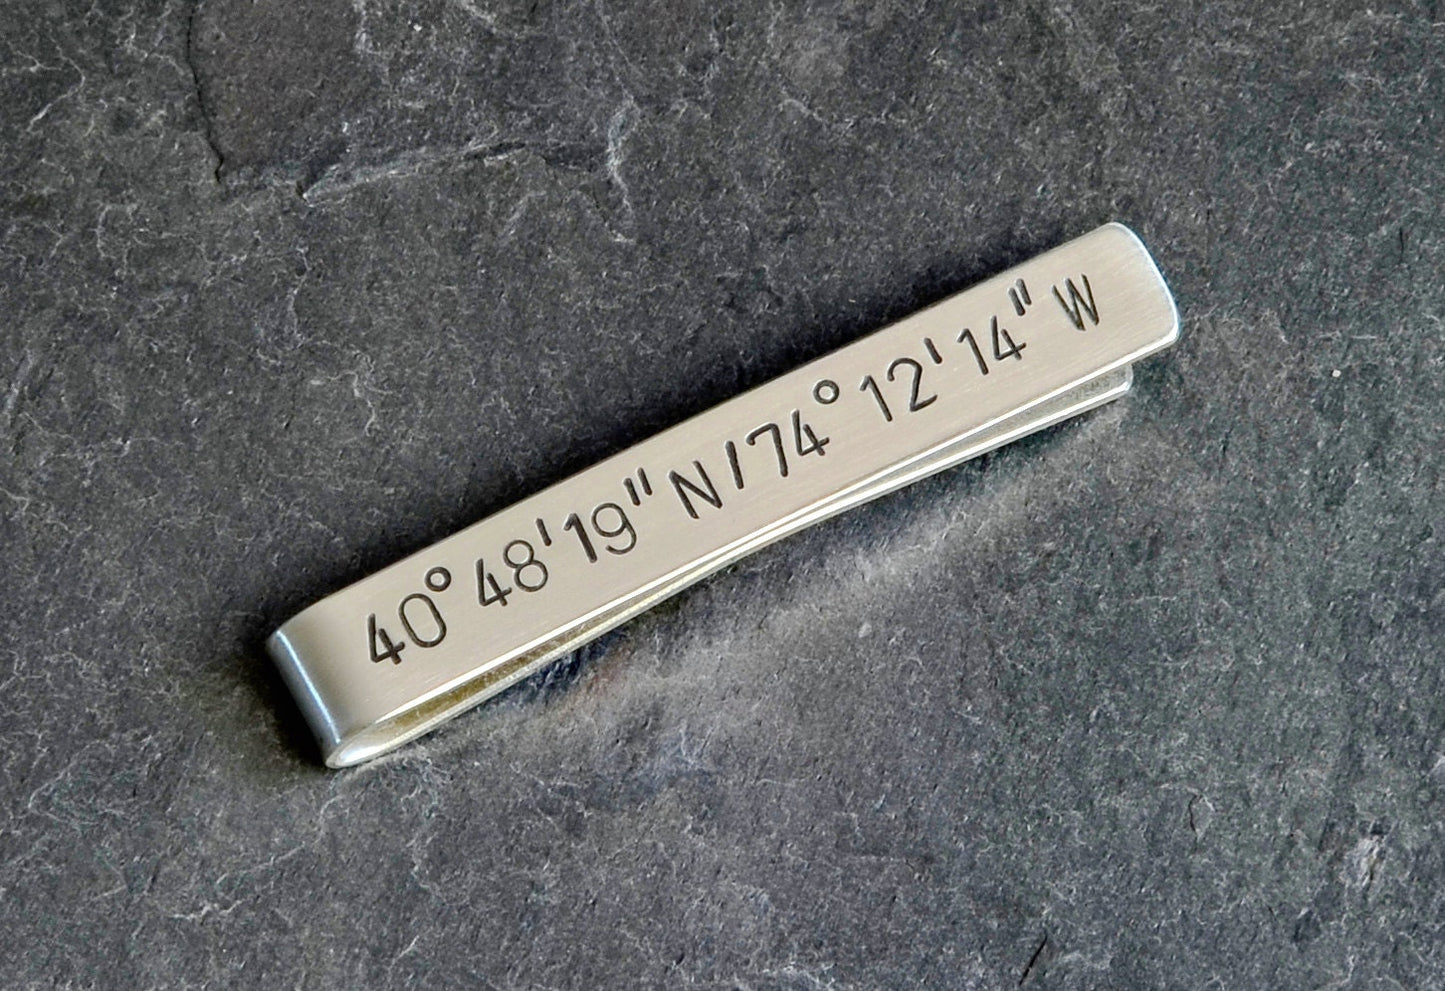 Sterling silver tie clip personalized with your coordinates